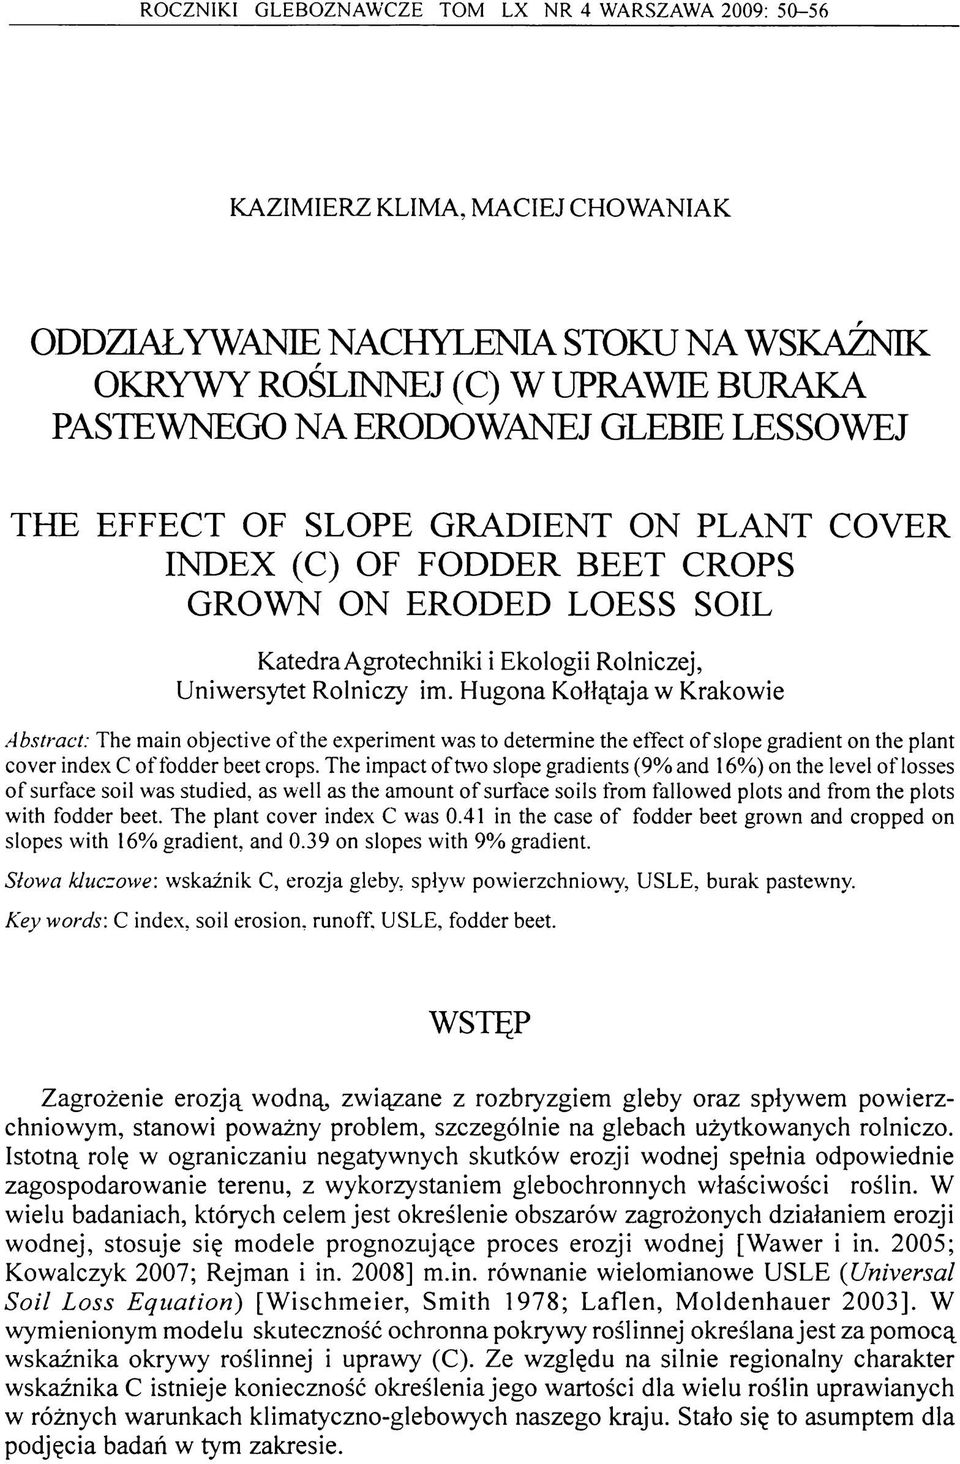 Hugona Kołłątaja w Krakowie Abstract: The main objective of the experiment was to determine the effect of slope gradient on the plant cover index C of fodder beet crops.